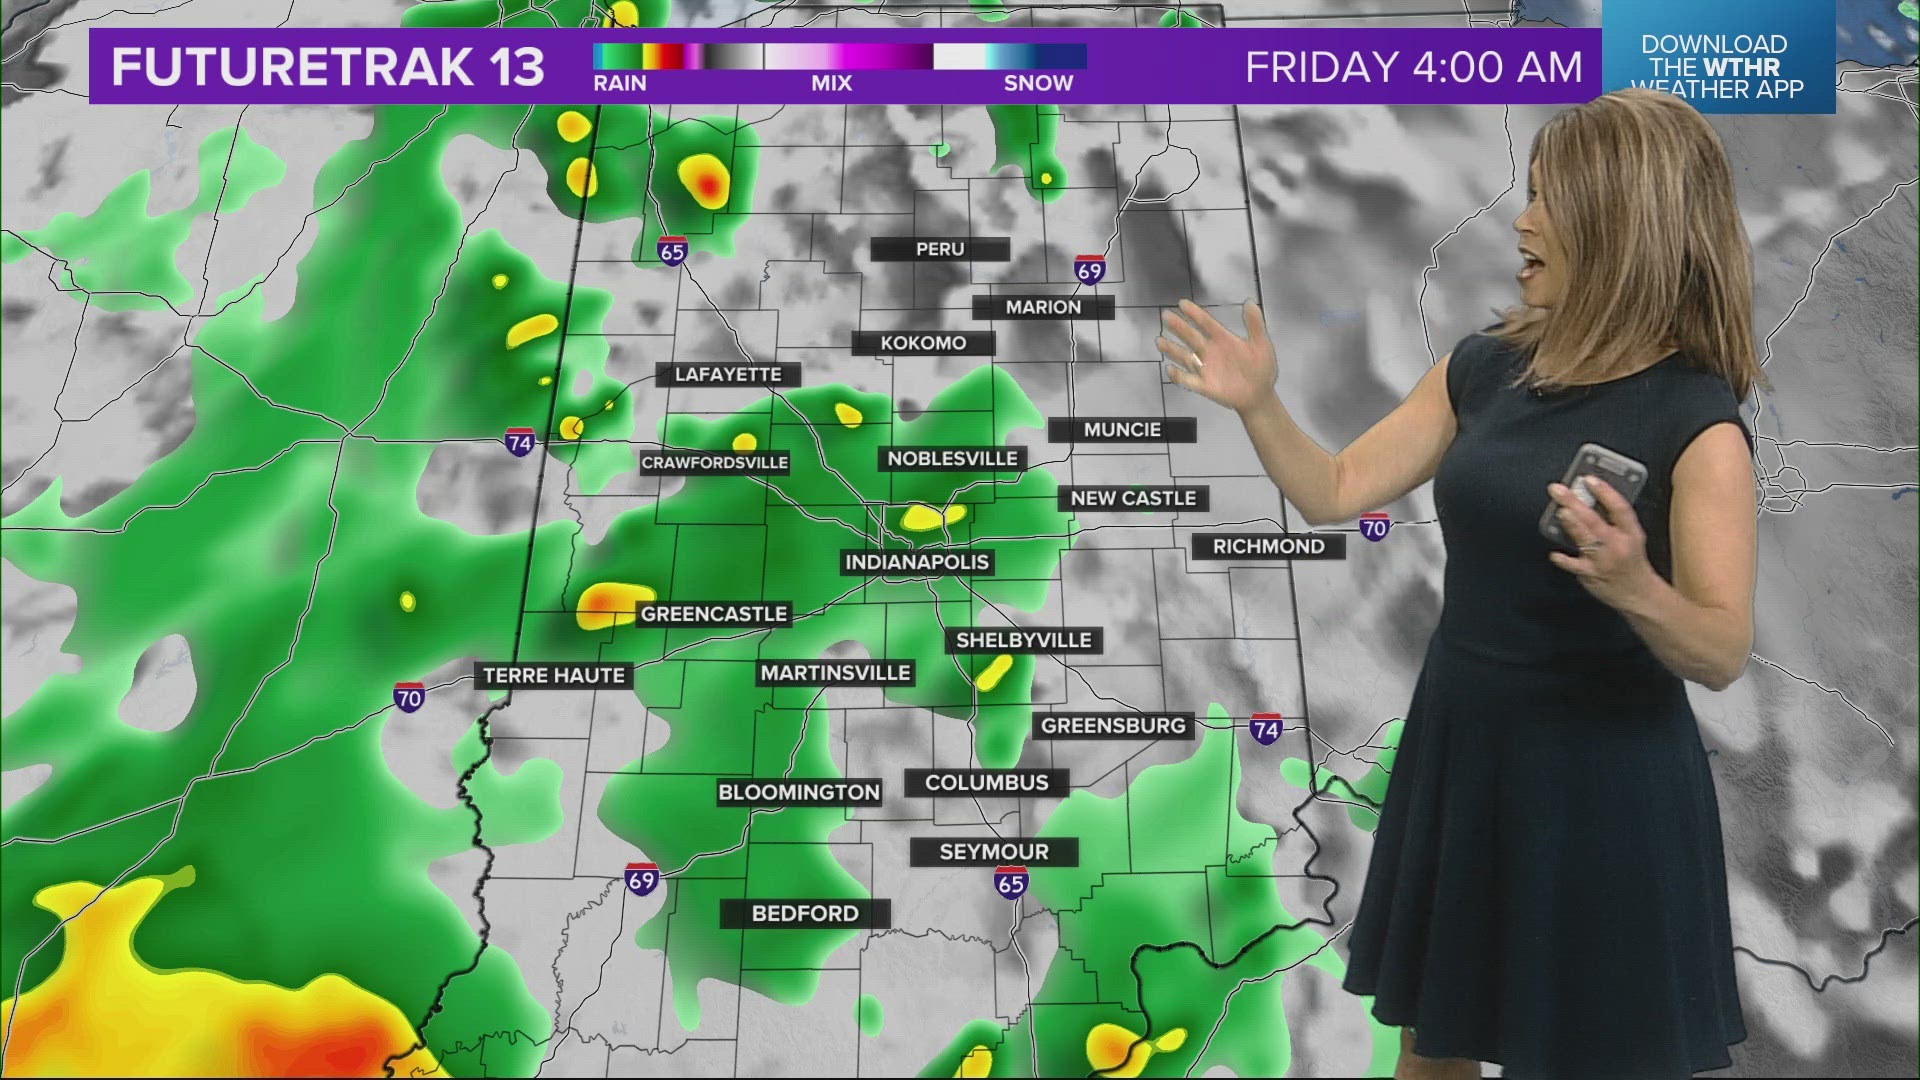 13News reporter Angela Buchman previews the weekend weather in central Indiana.